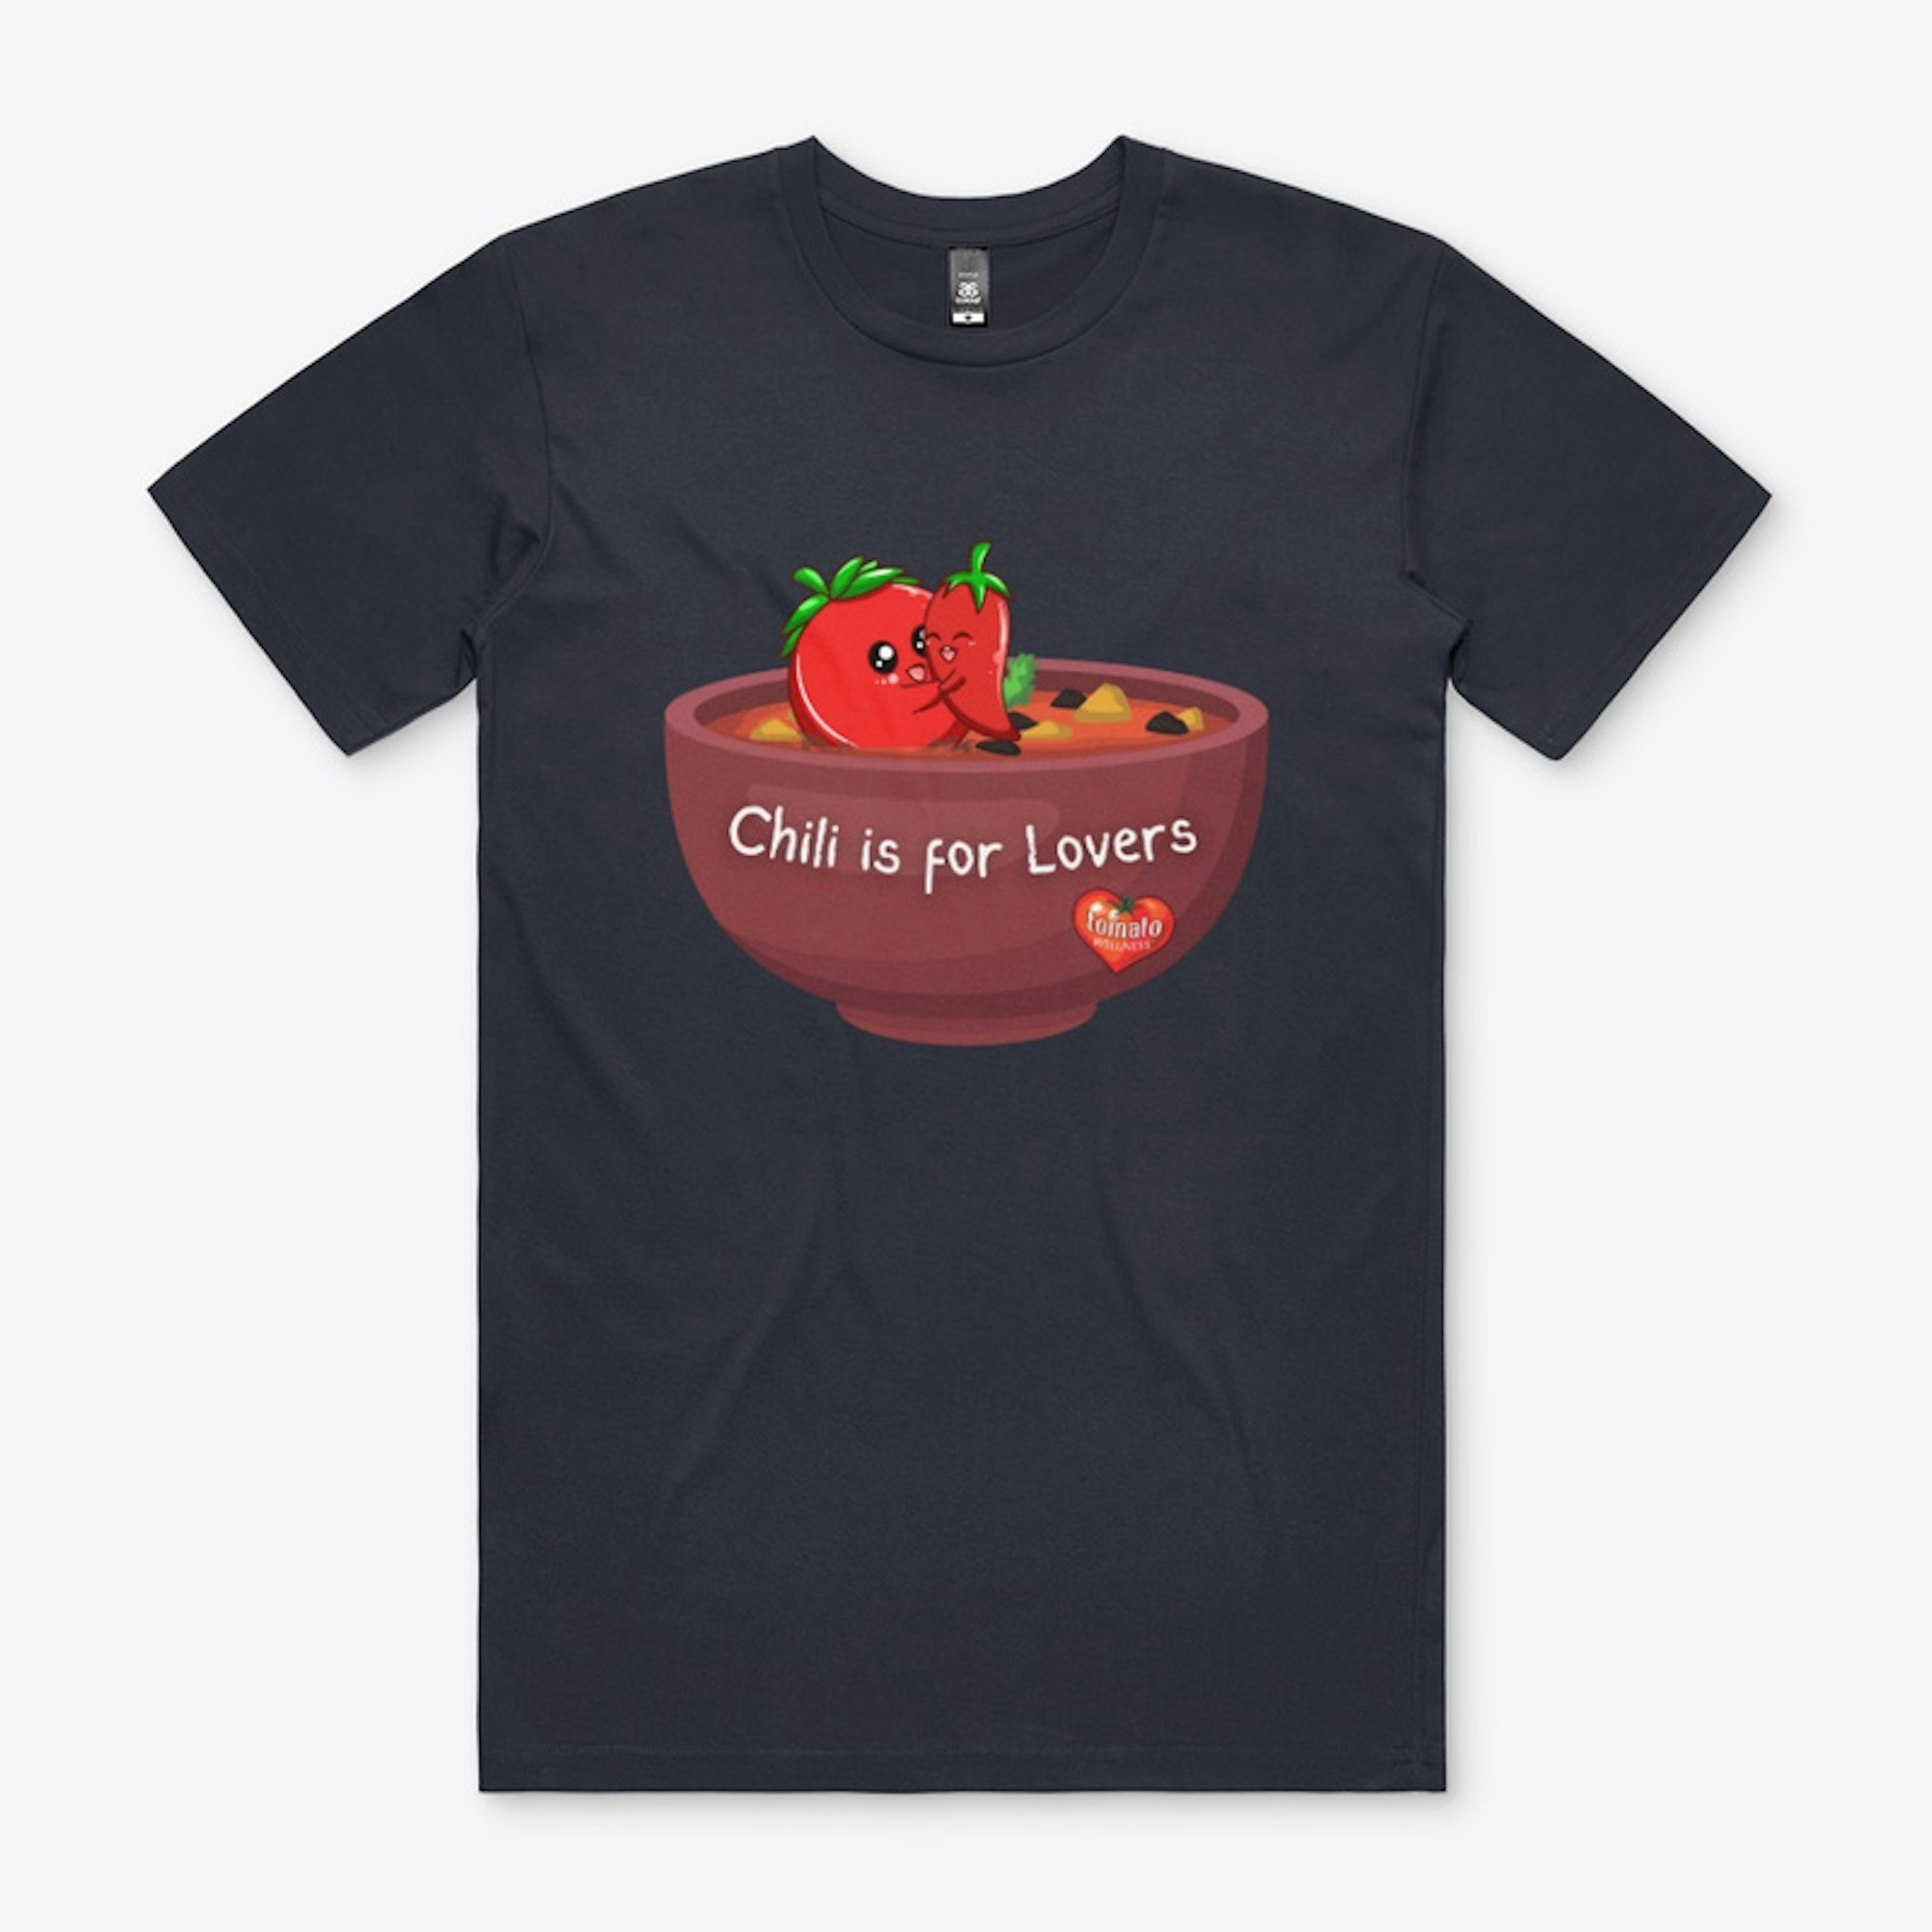 Chili is for Lovers 